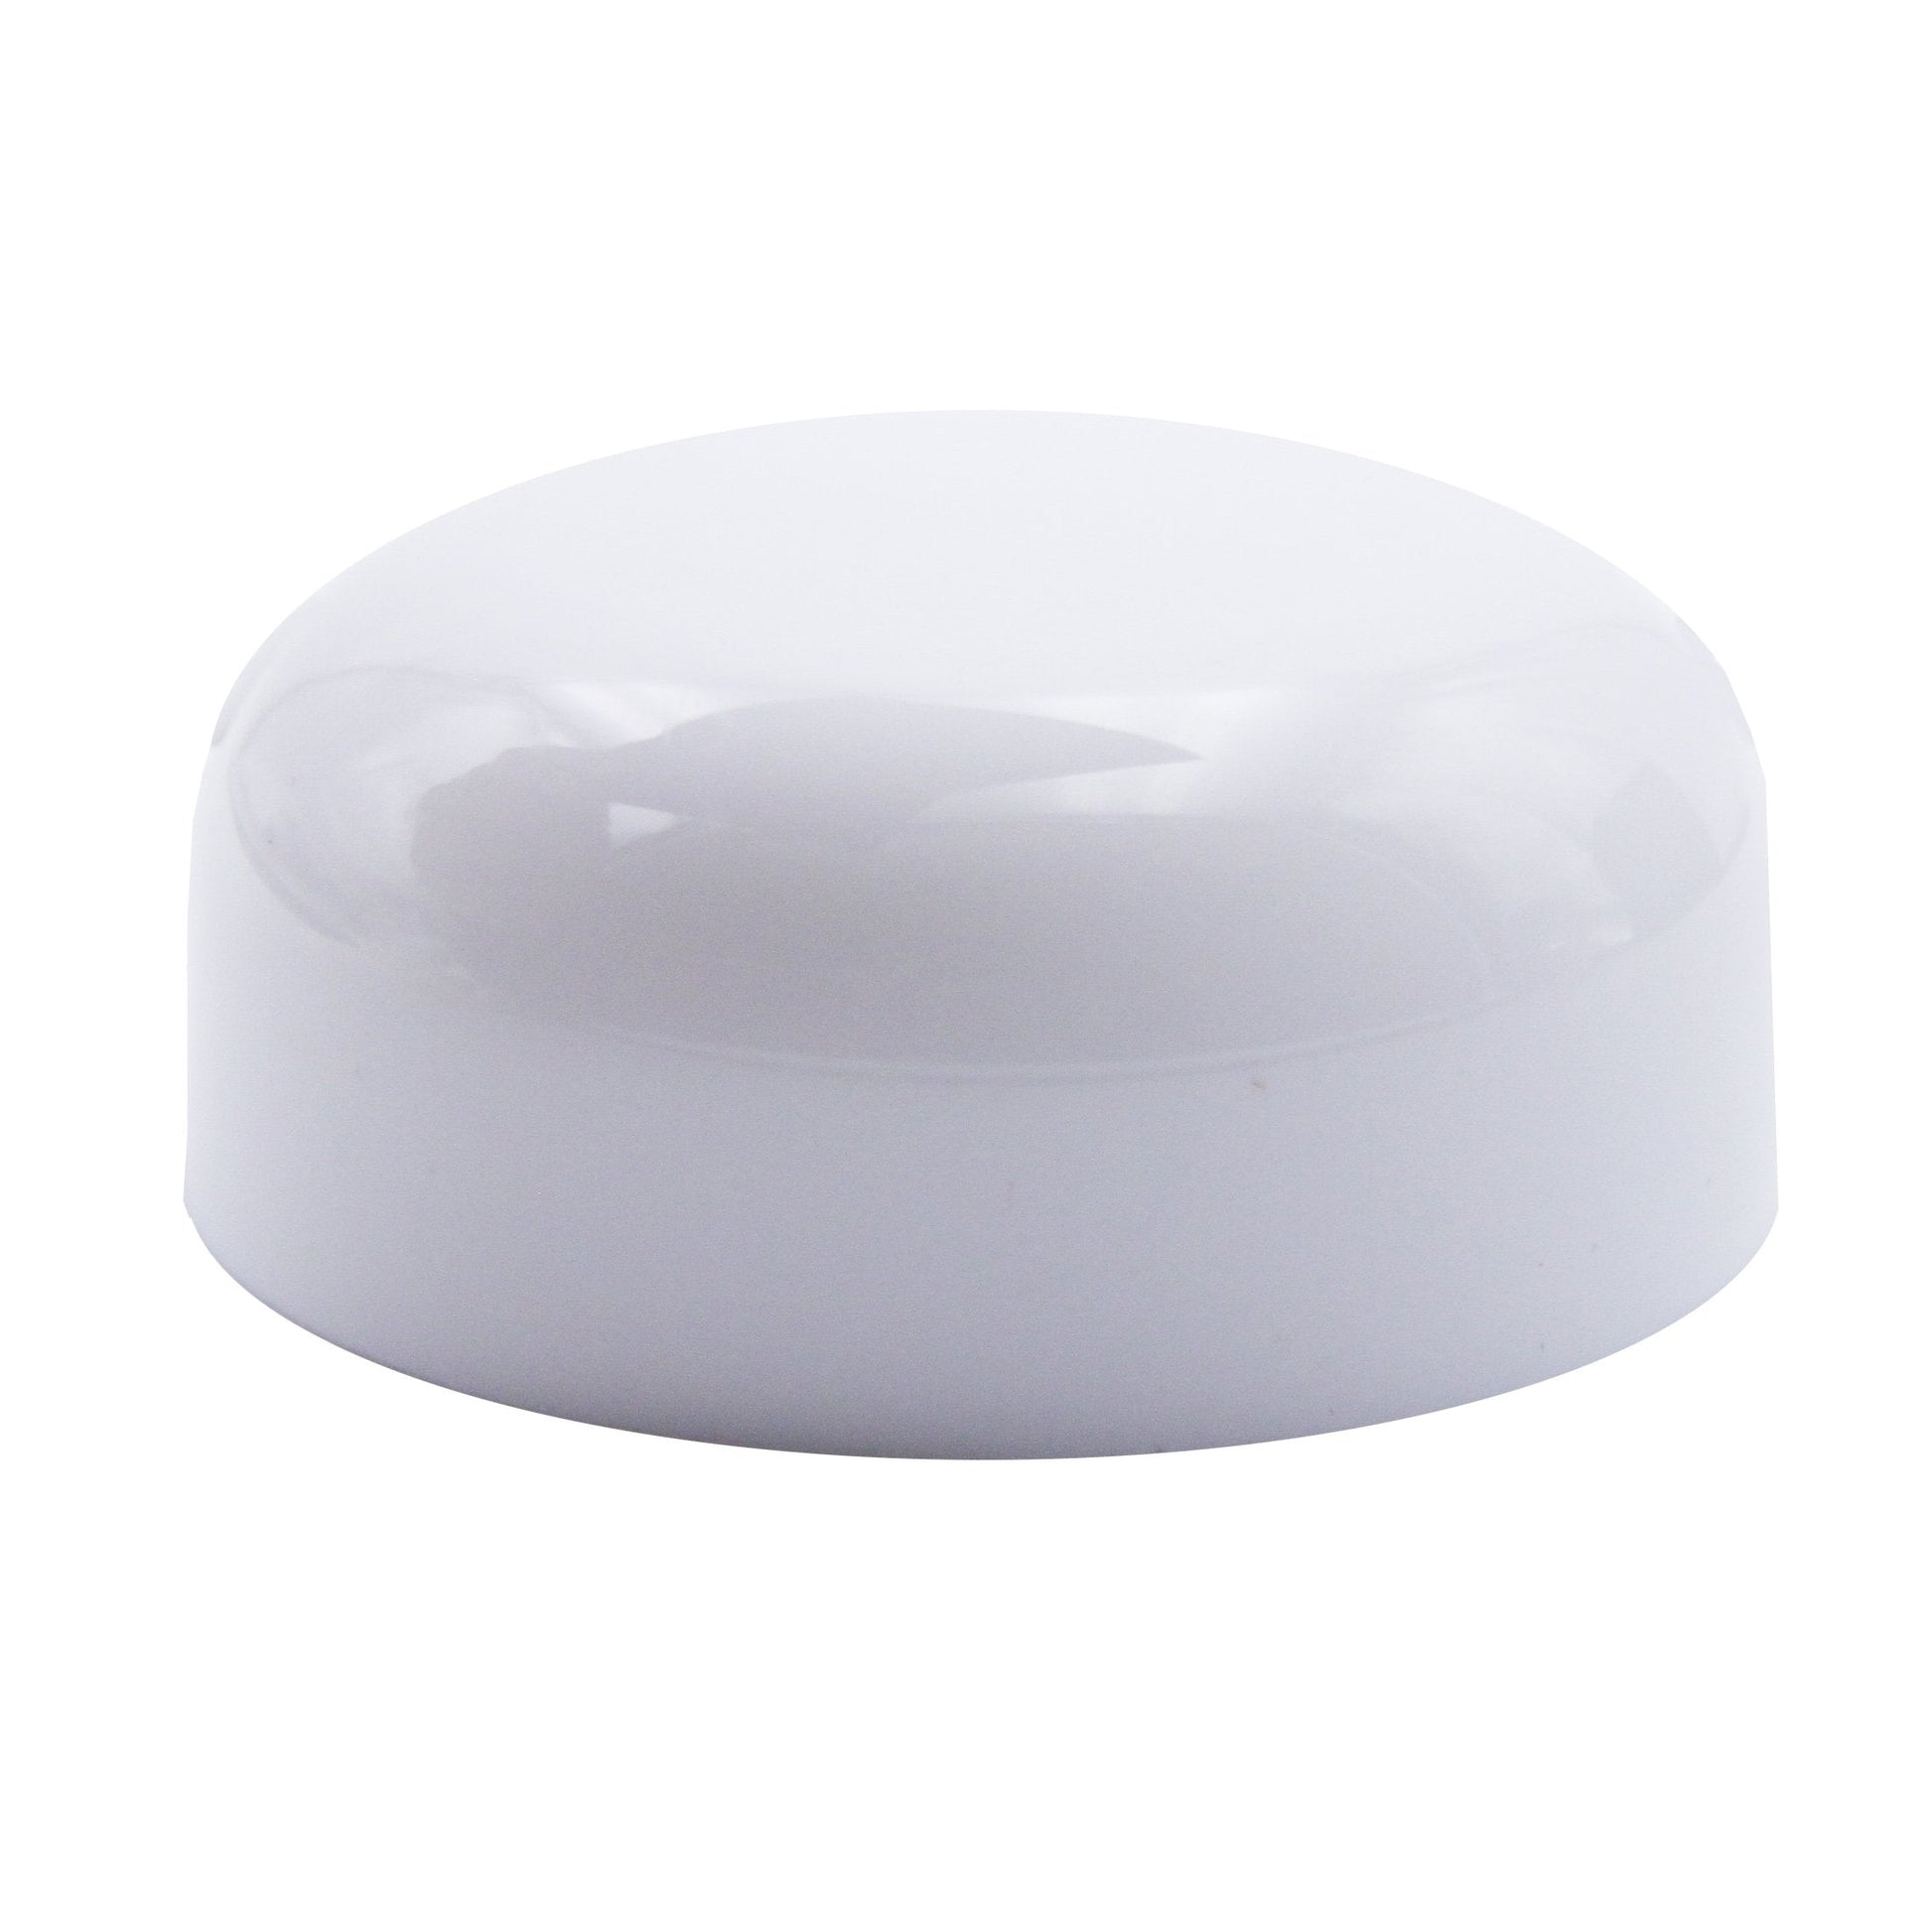 Glossy White eBottles Child-Resistant PE-Lined Dome Cap | 53 mm